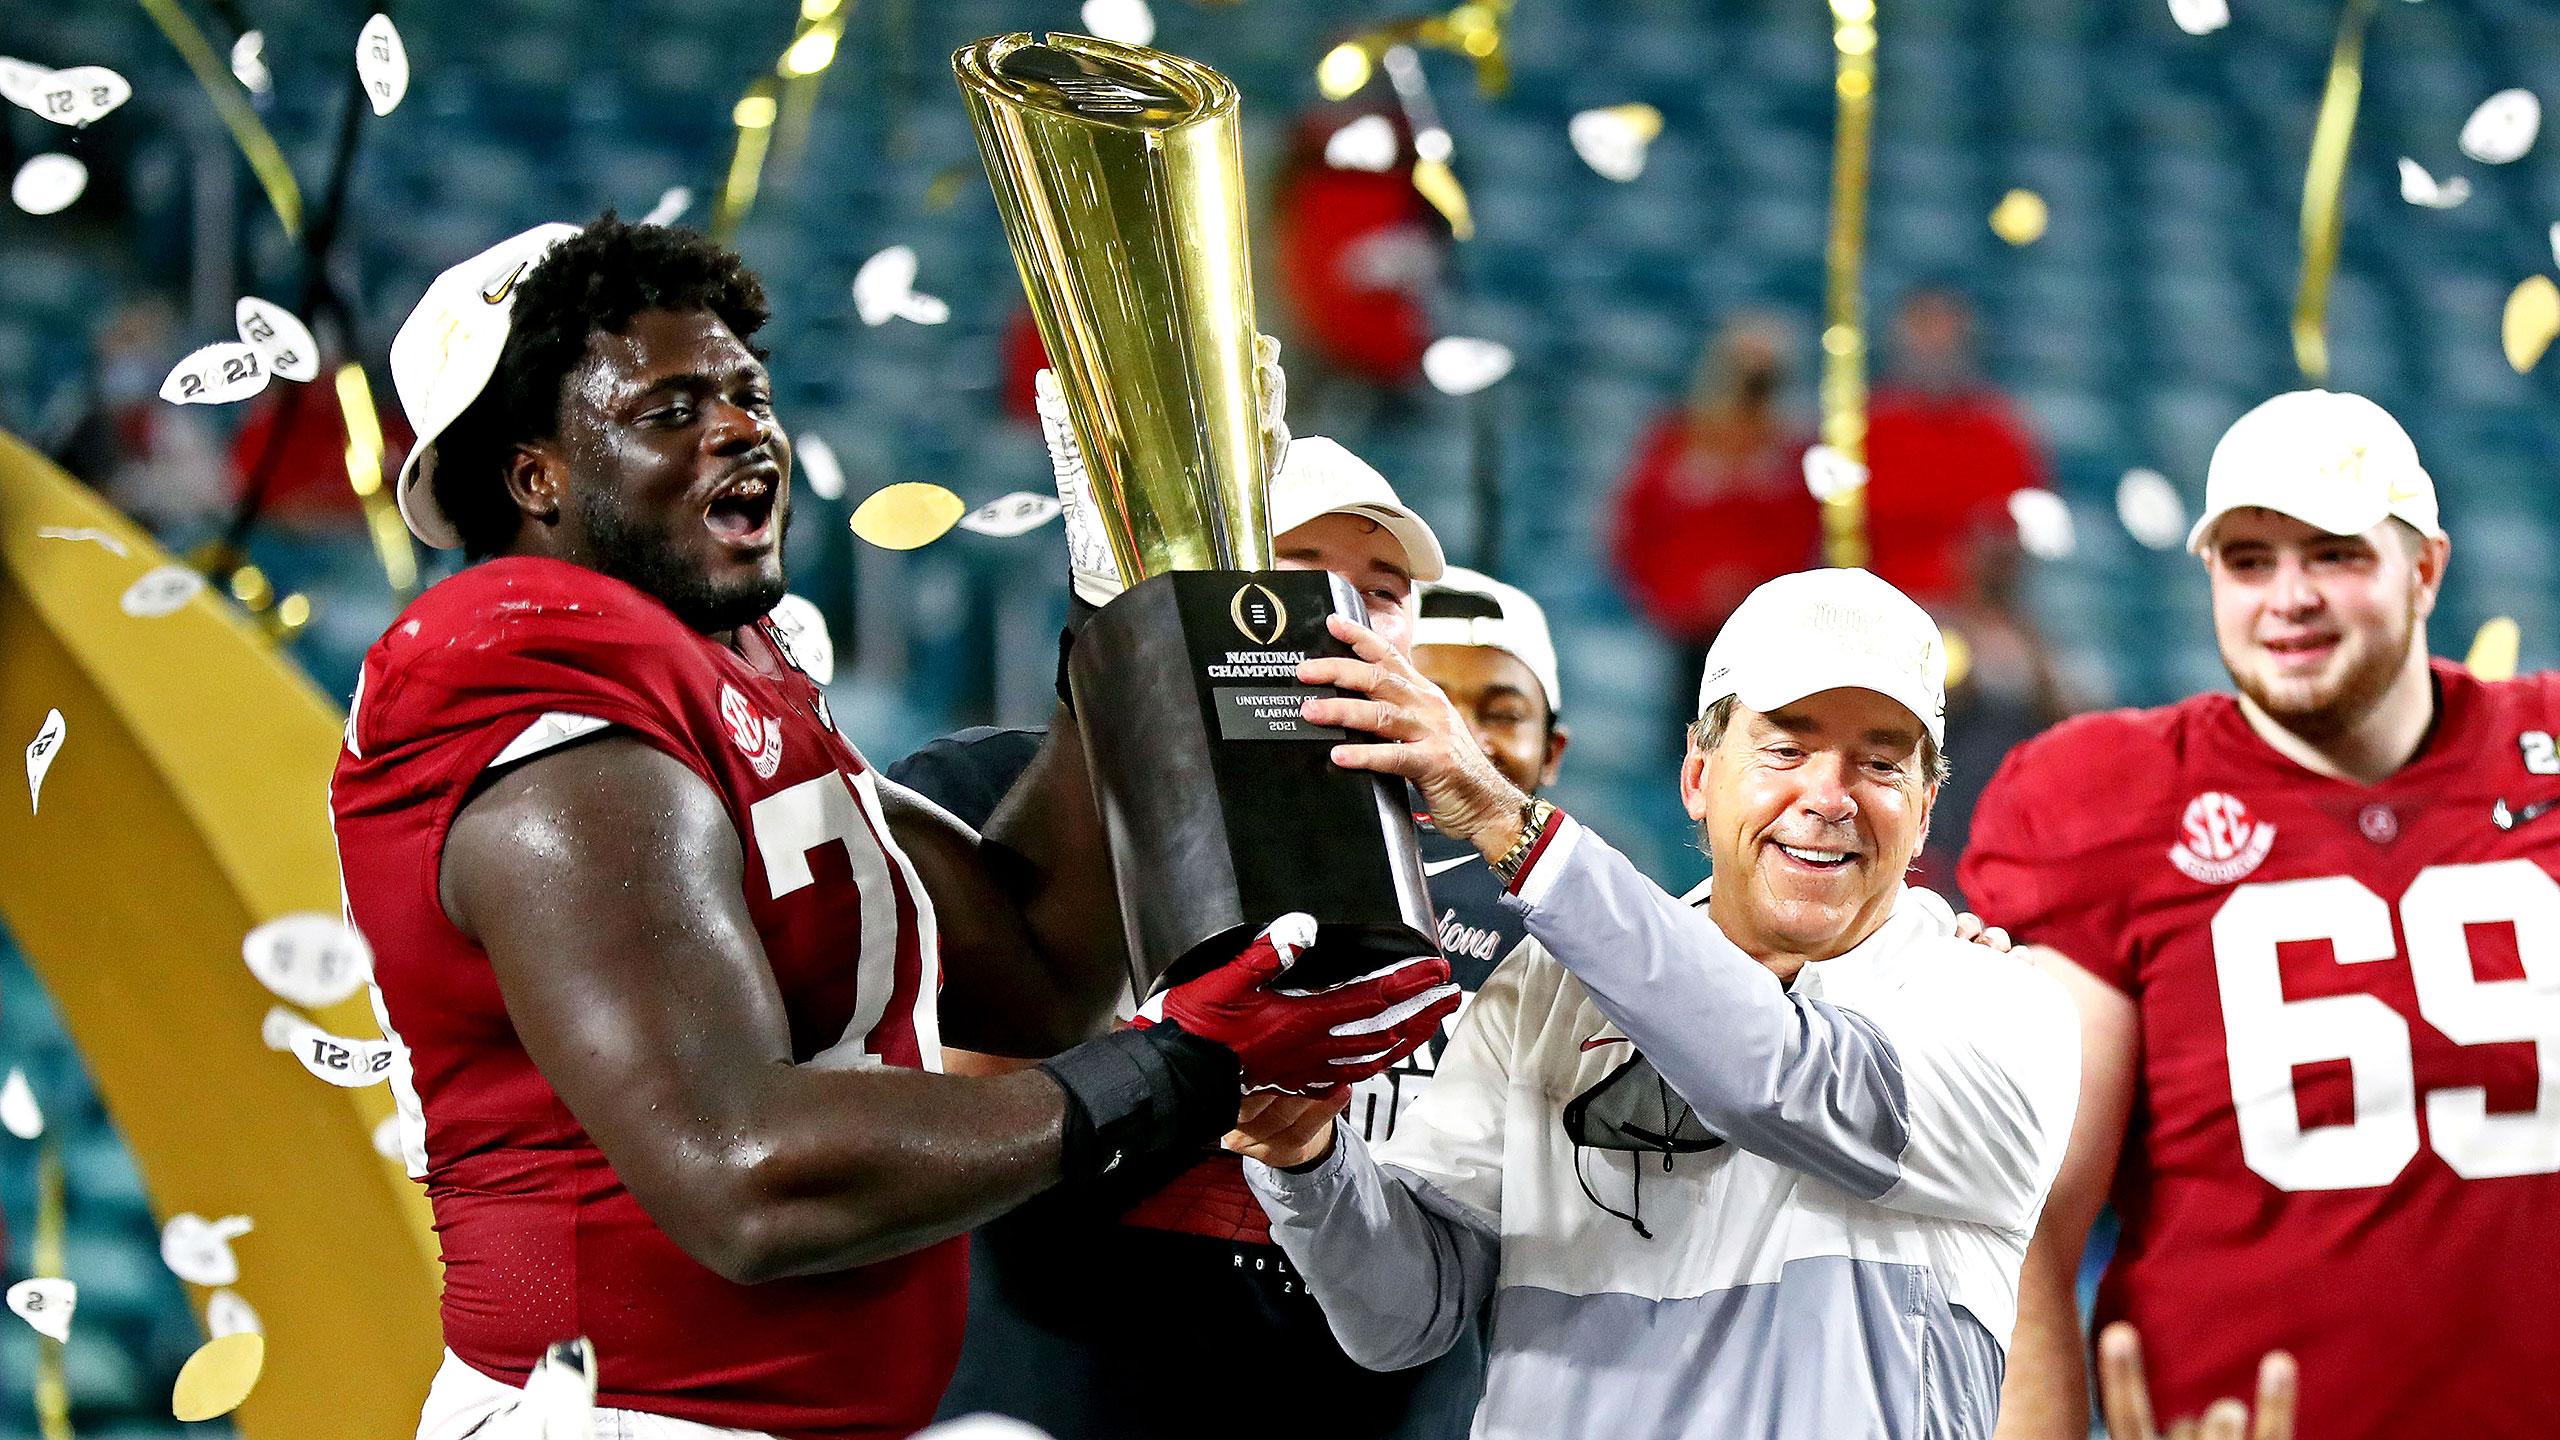 Why Alabama, Georgia and other SEC teams have dominated the CFP